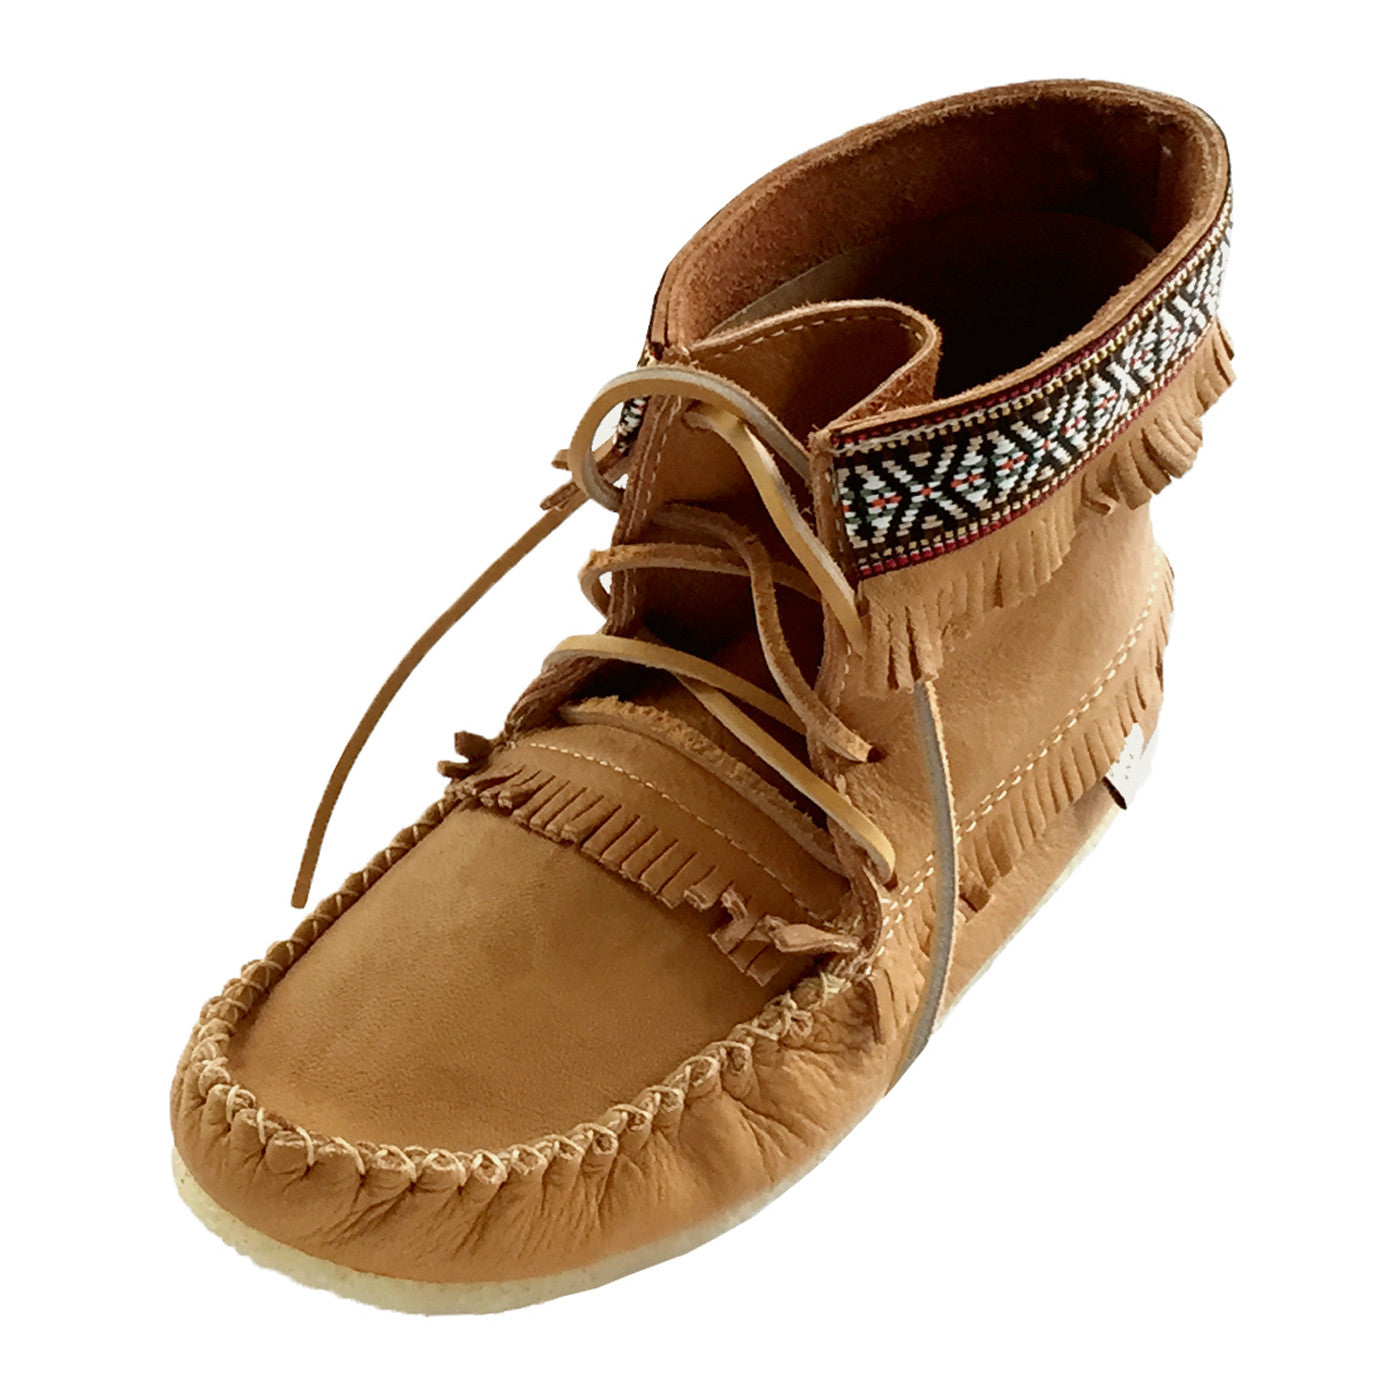 Men&amp;#39;s Cork Brown Ankle Moccasin Boots Handmade from Real Moose Hide ...